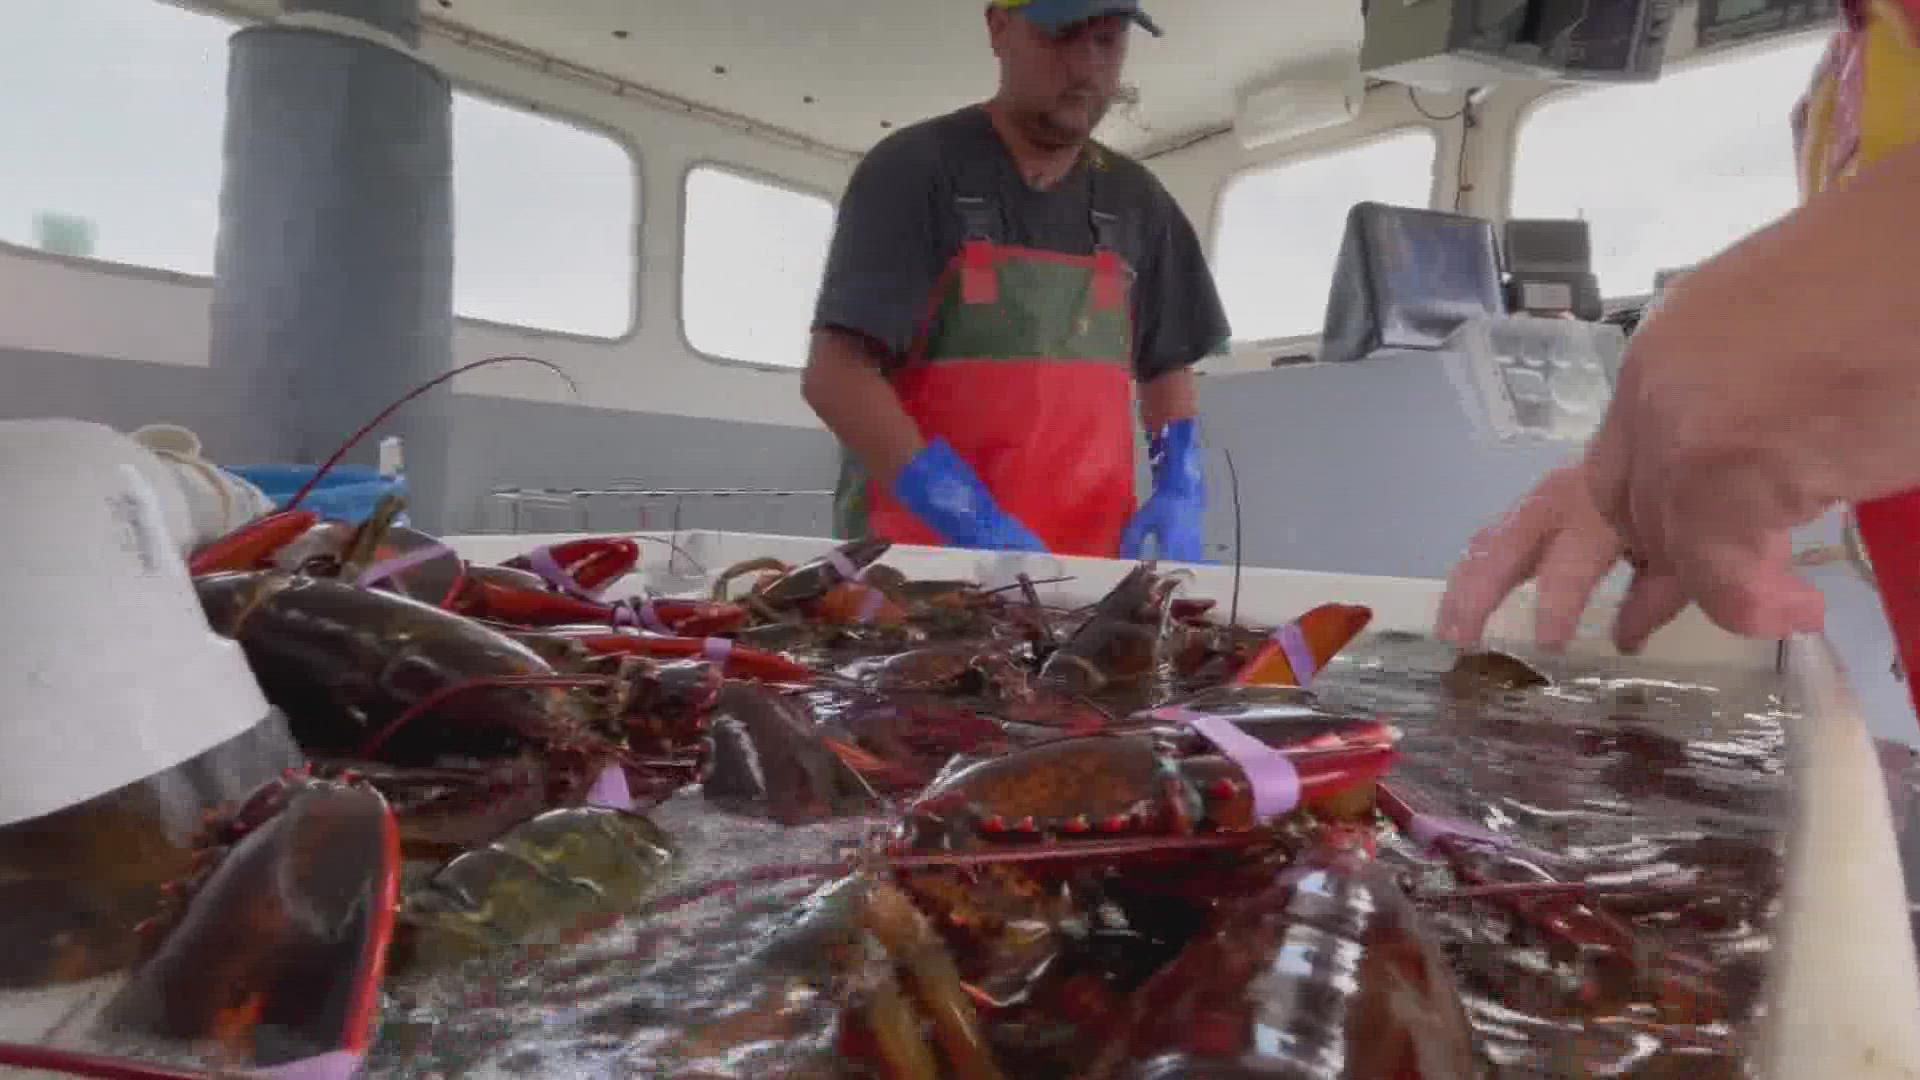 Whole Foods recently said it will suspend the sale of Maine lobster. This comes after ongoing legal battles within the Maine lobster industry.